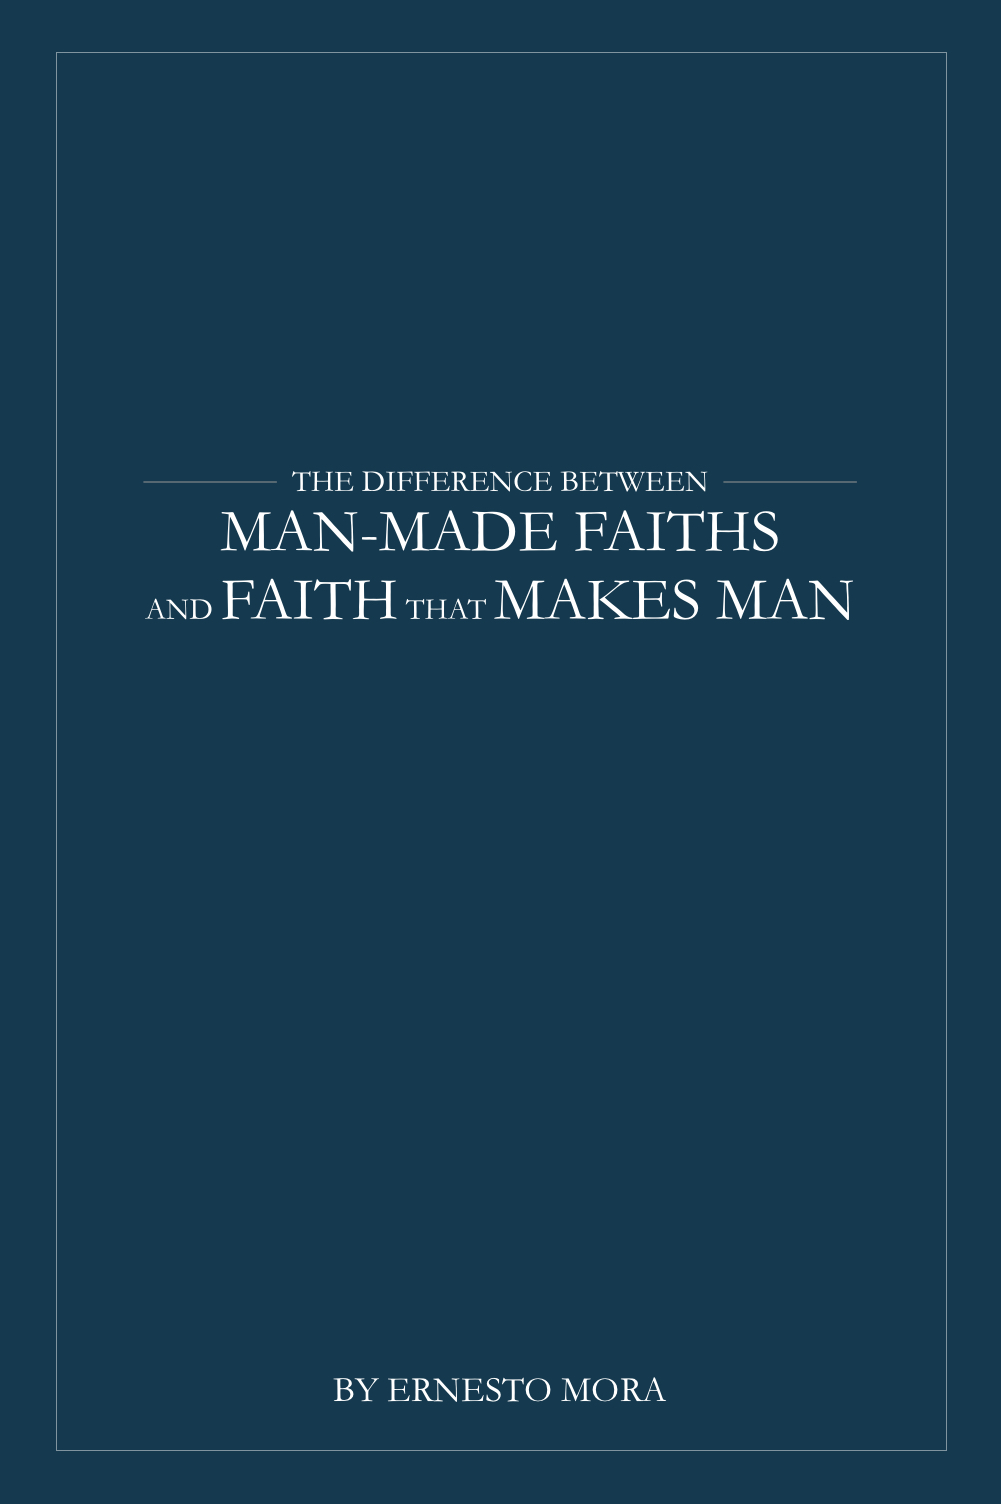 The Difference between Man-Made Faiths, and Faith that makes man.